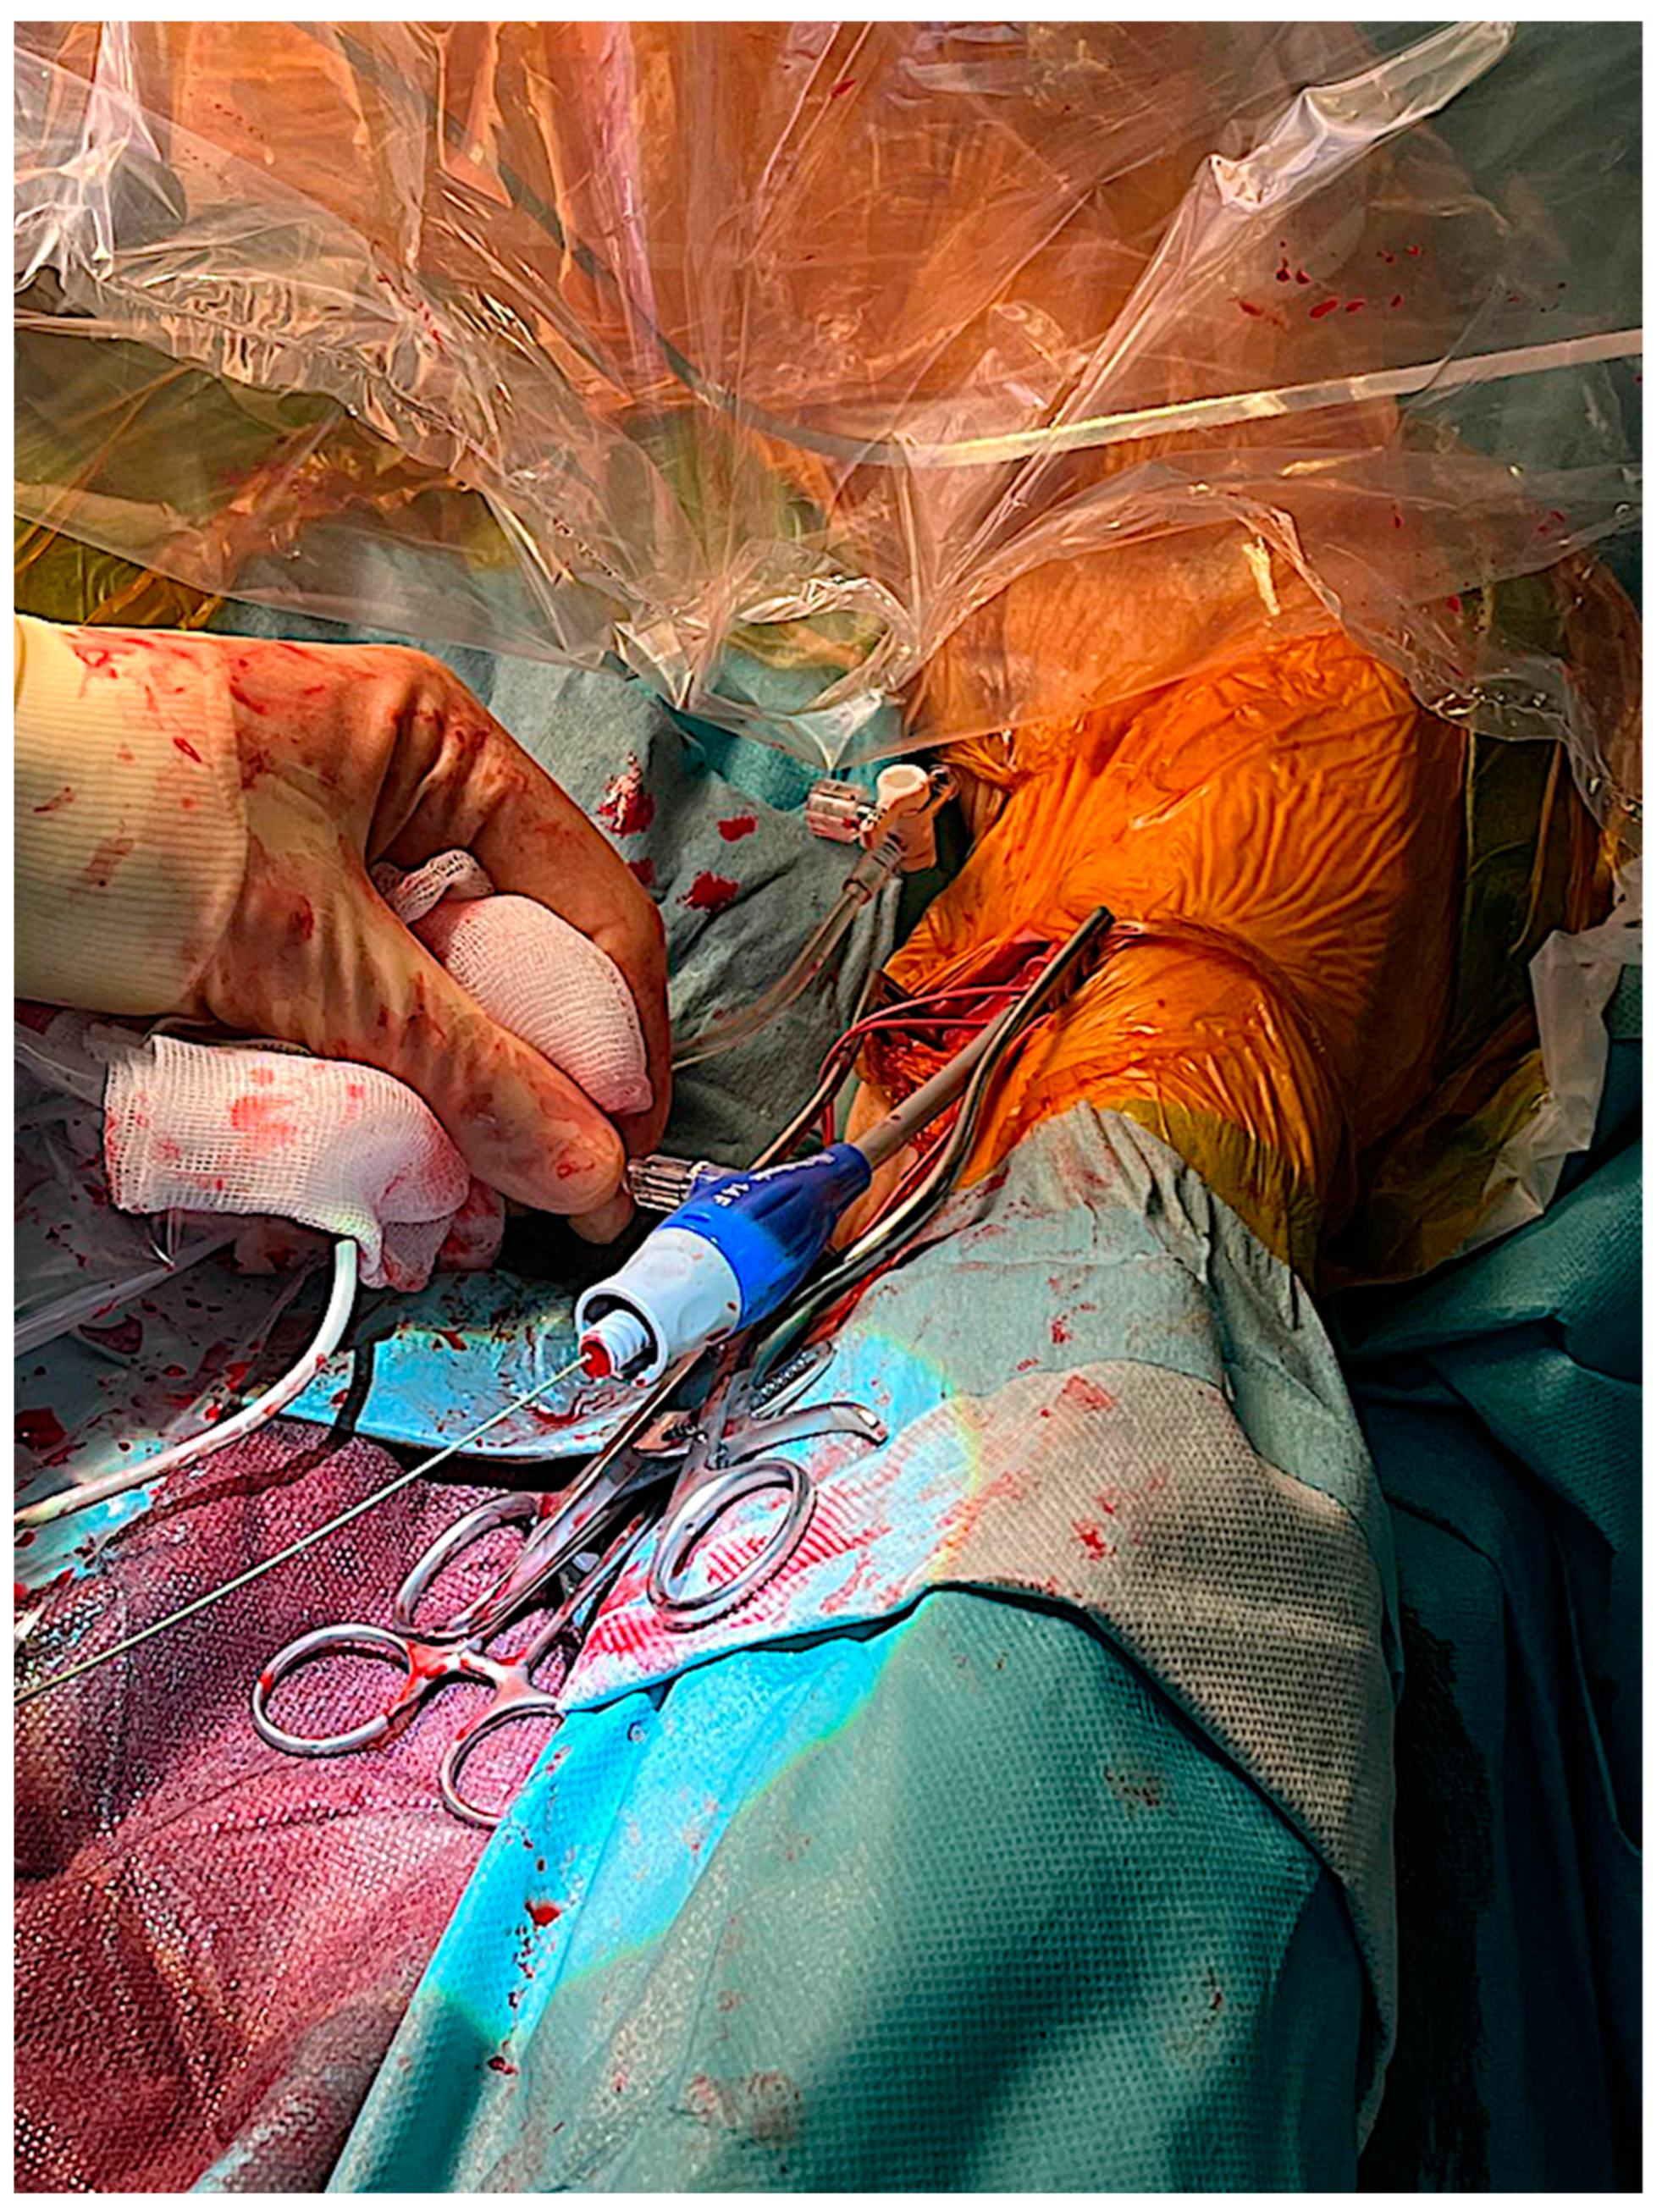 Femoral hernia in the era of TAVI – a potential obstacle for